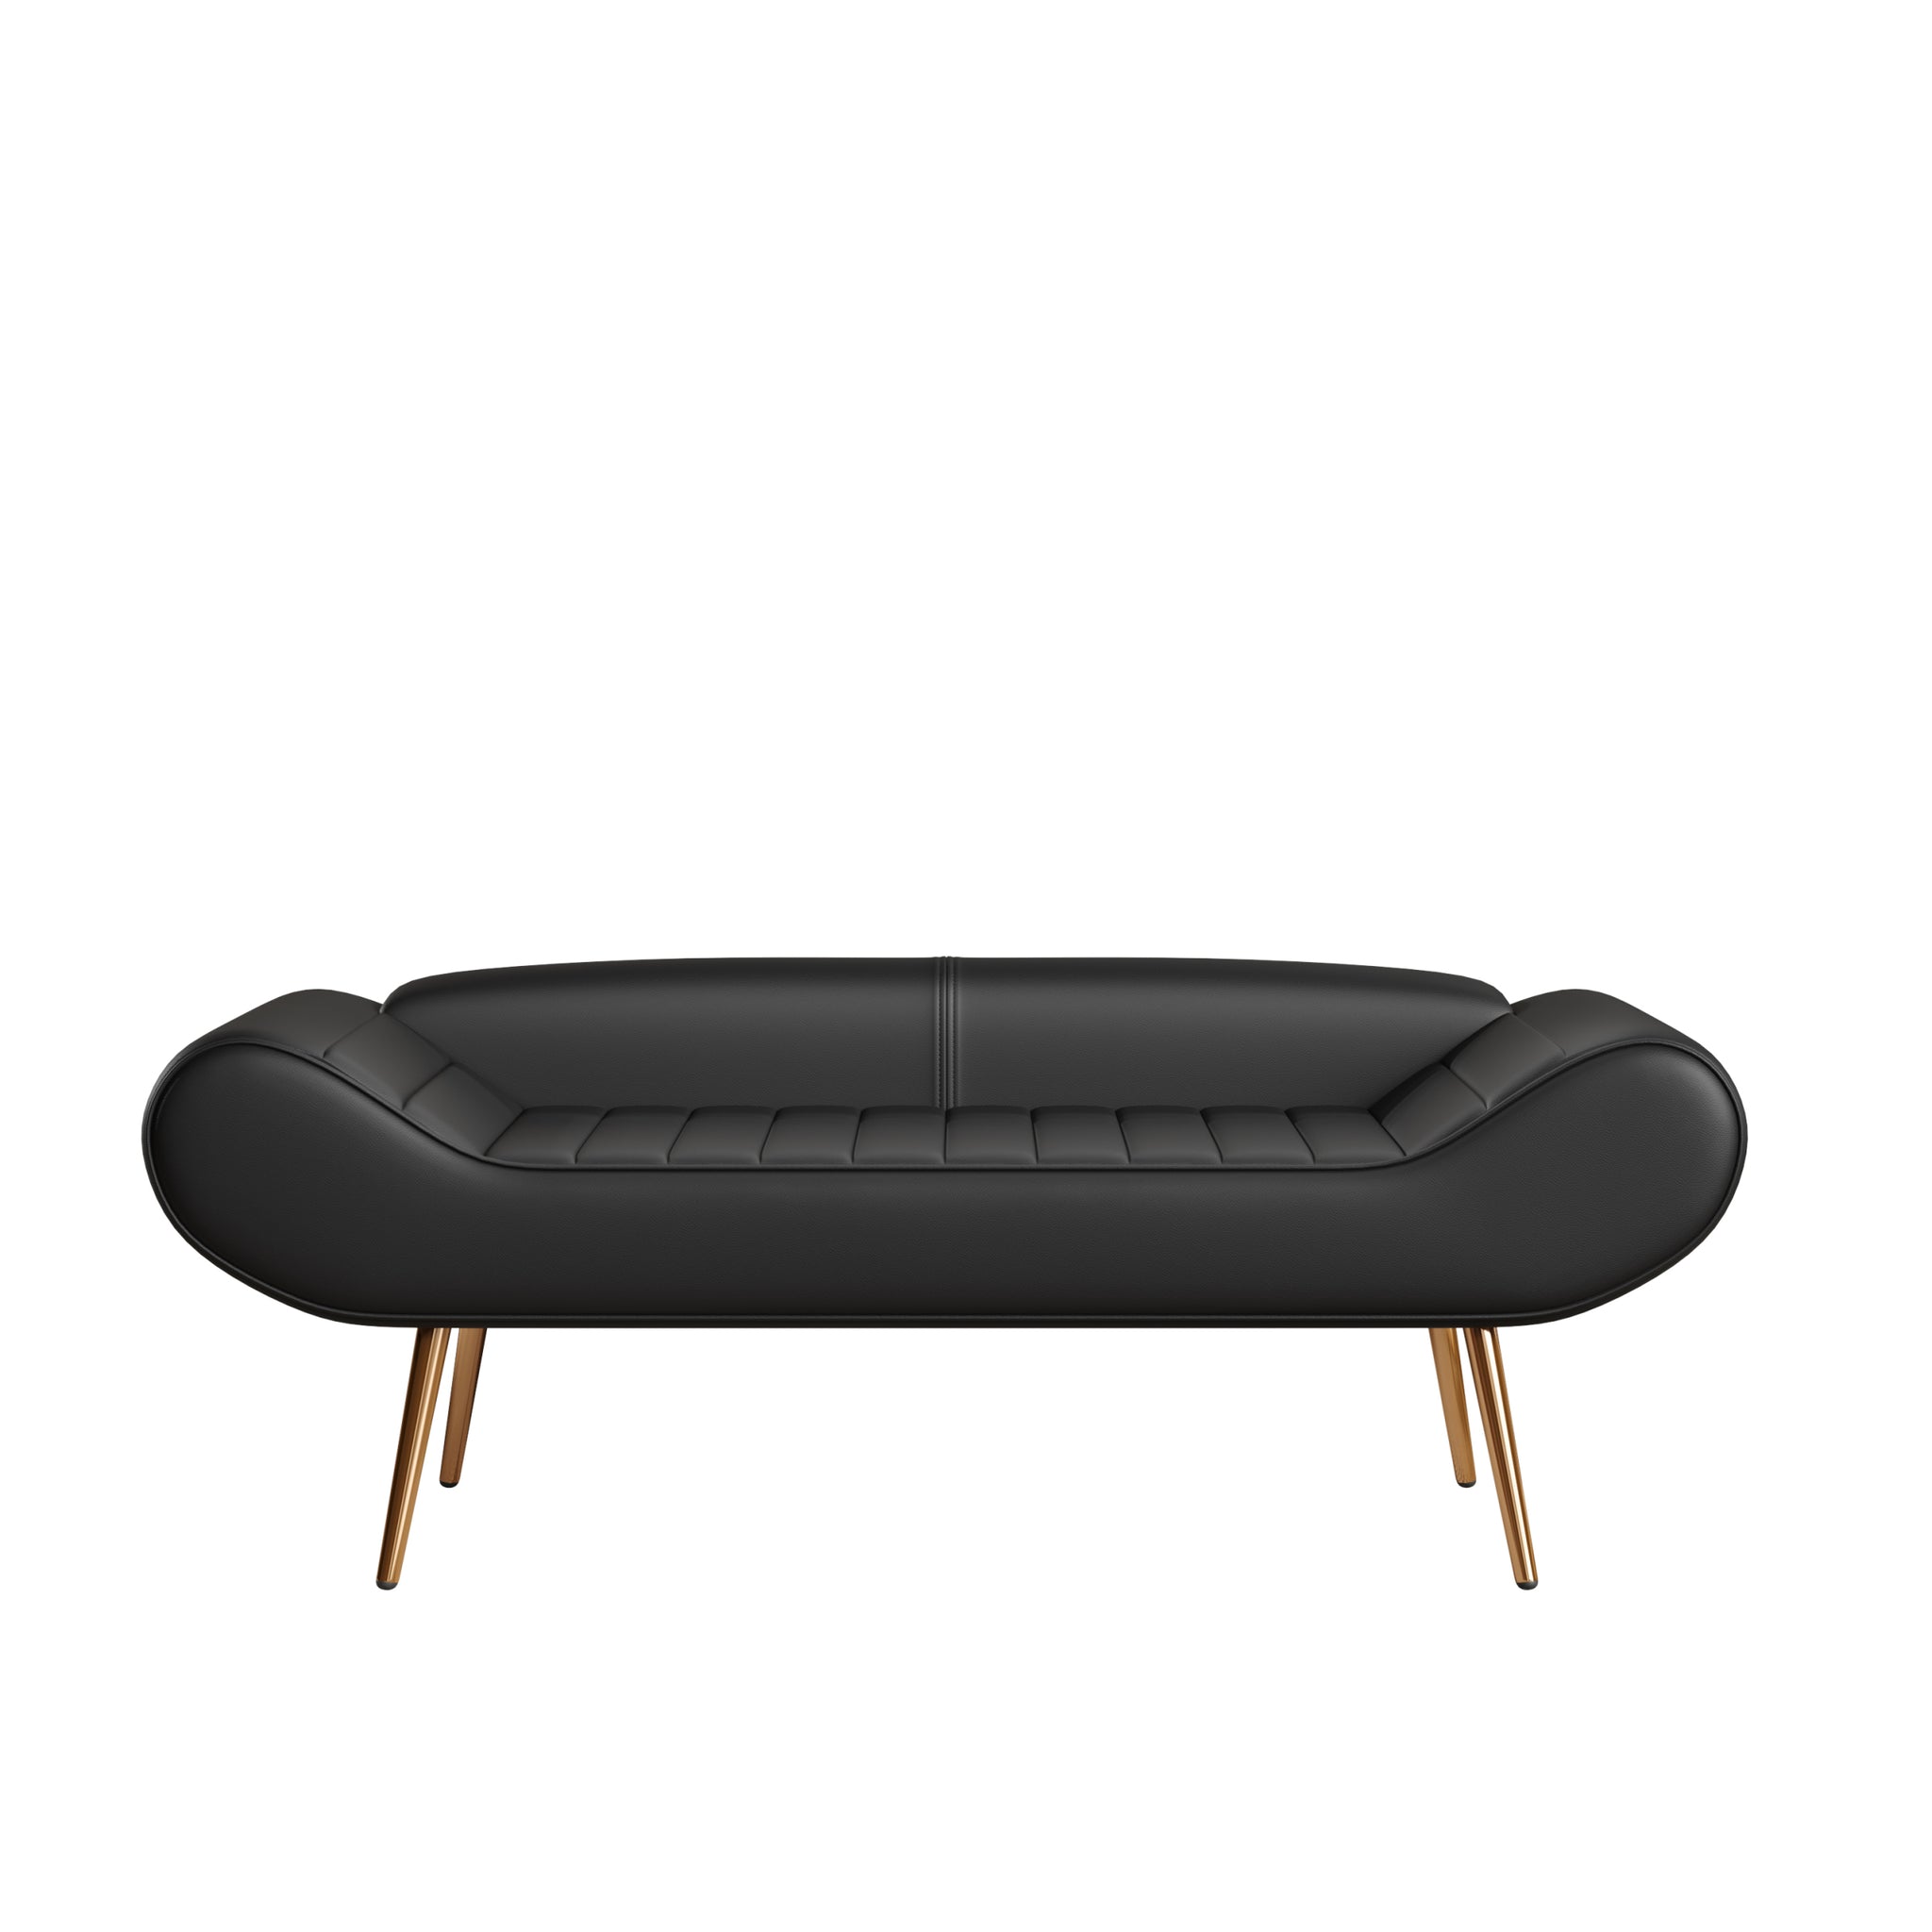 57 inch sofa stool PVC fabric can be placed in the bed black-polyester blend